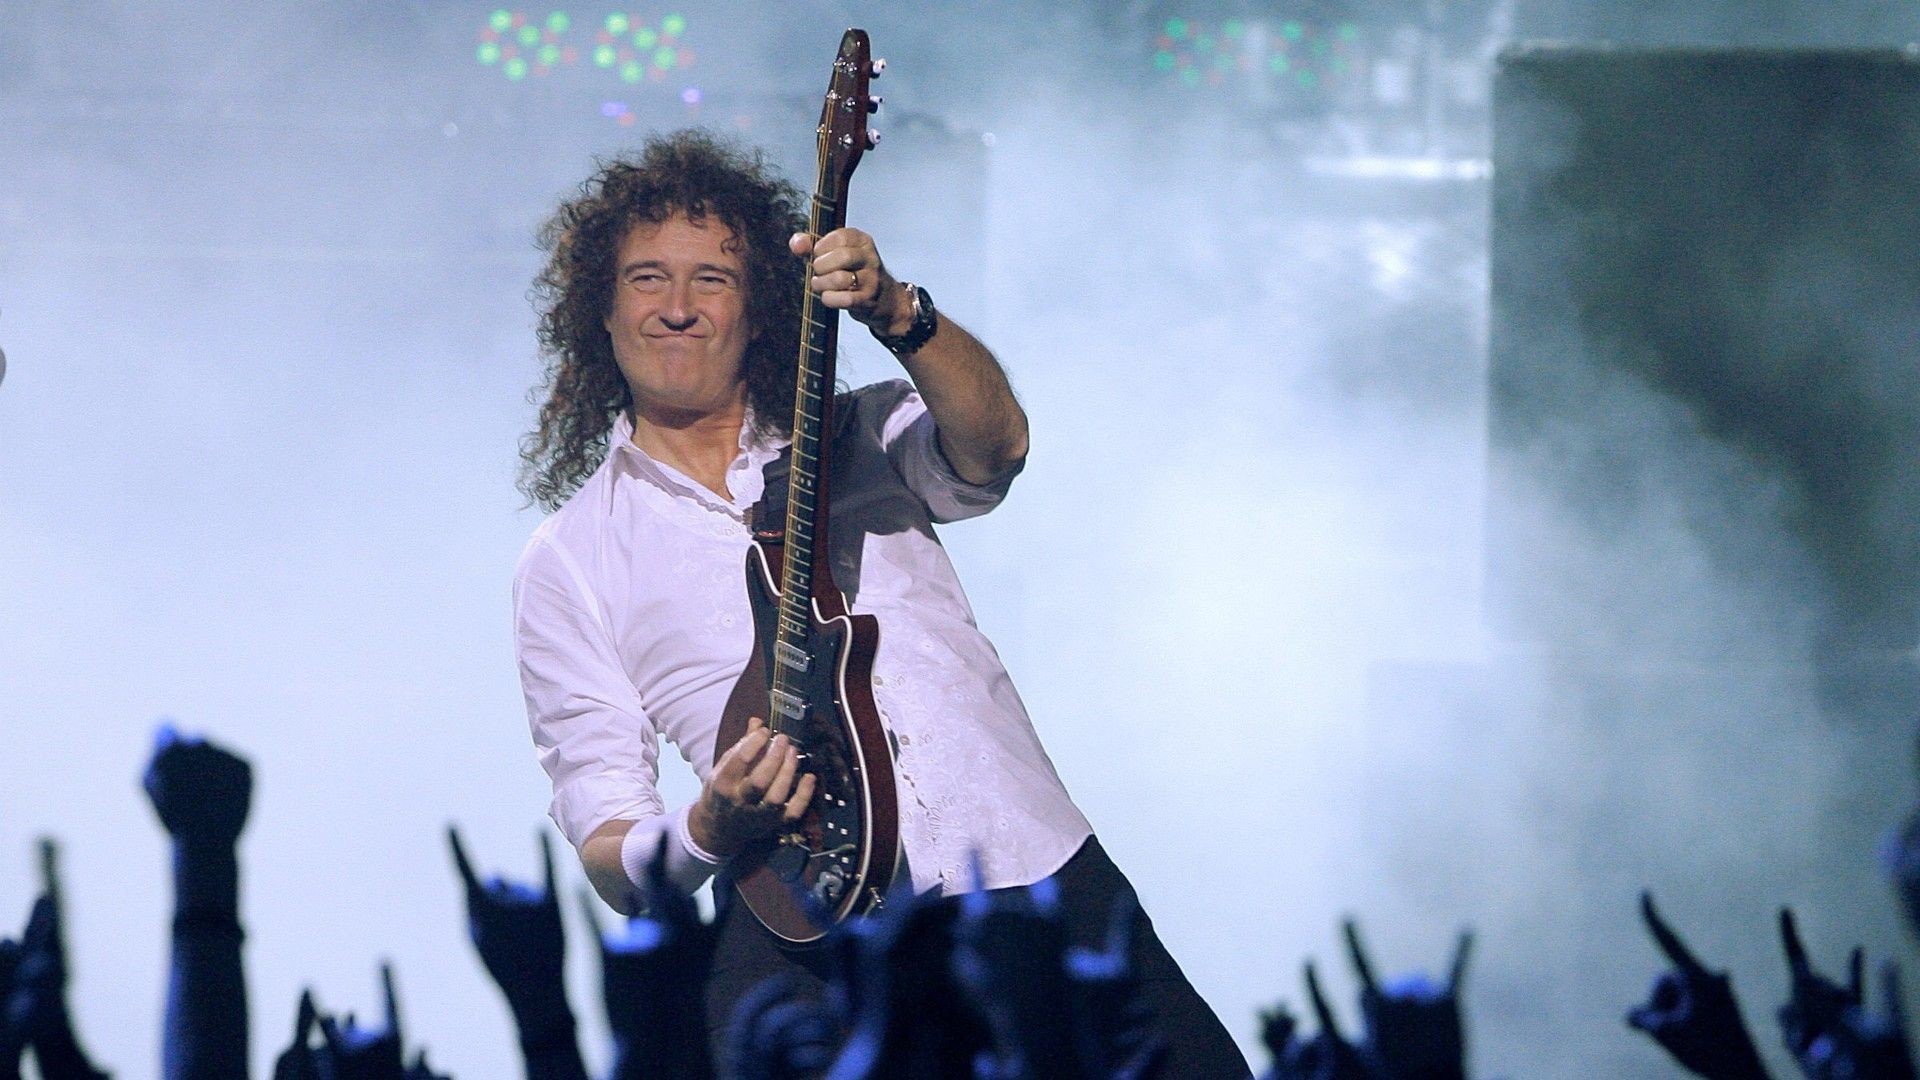 1920x1080 Brian May Full HD Wallpaper and Background |  | ID:196085